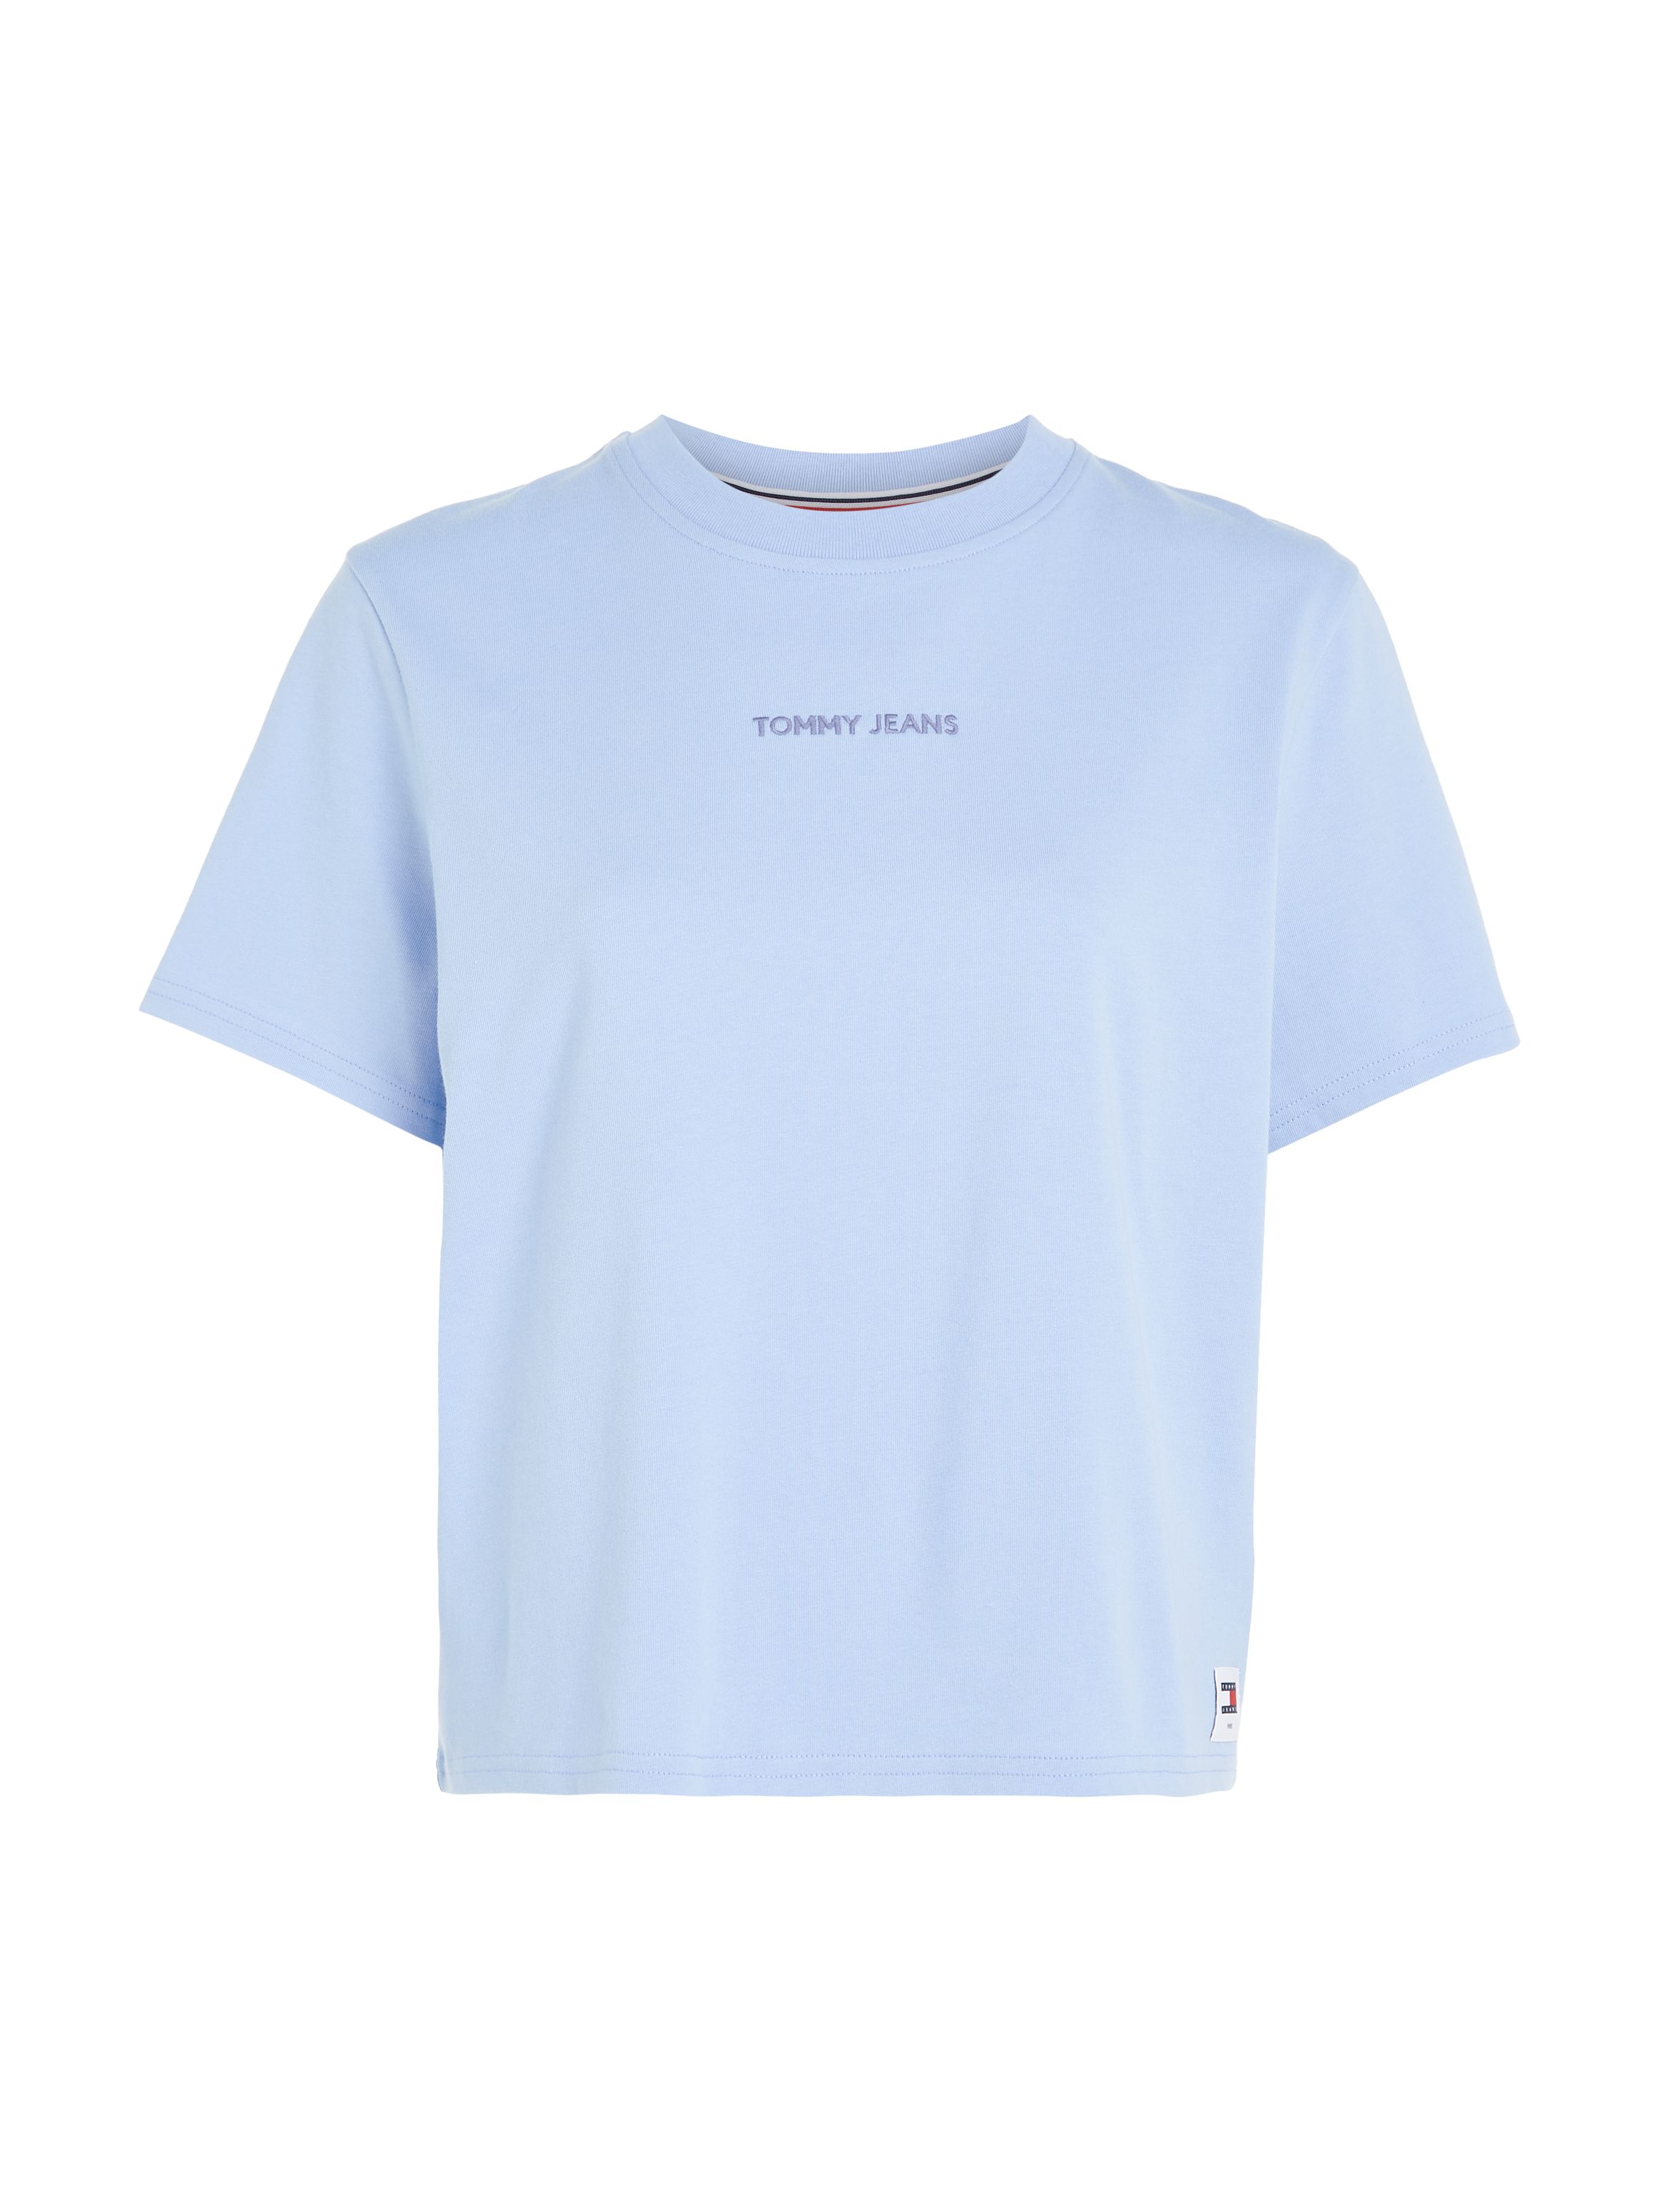 Tommy Jeans New Classic Tee